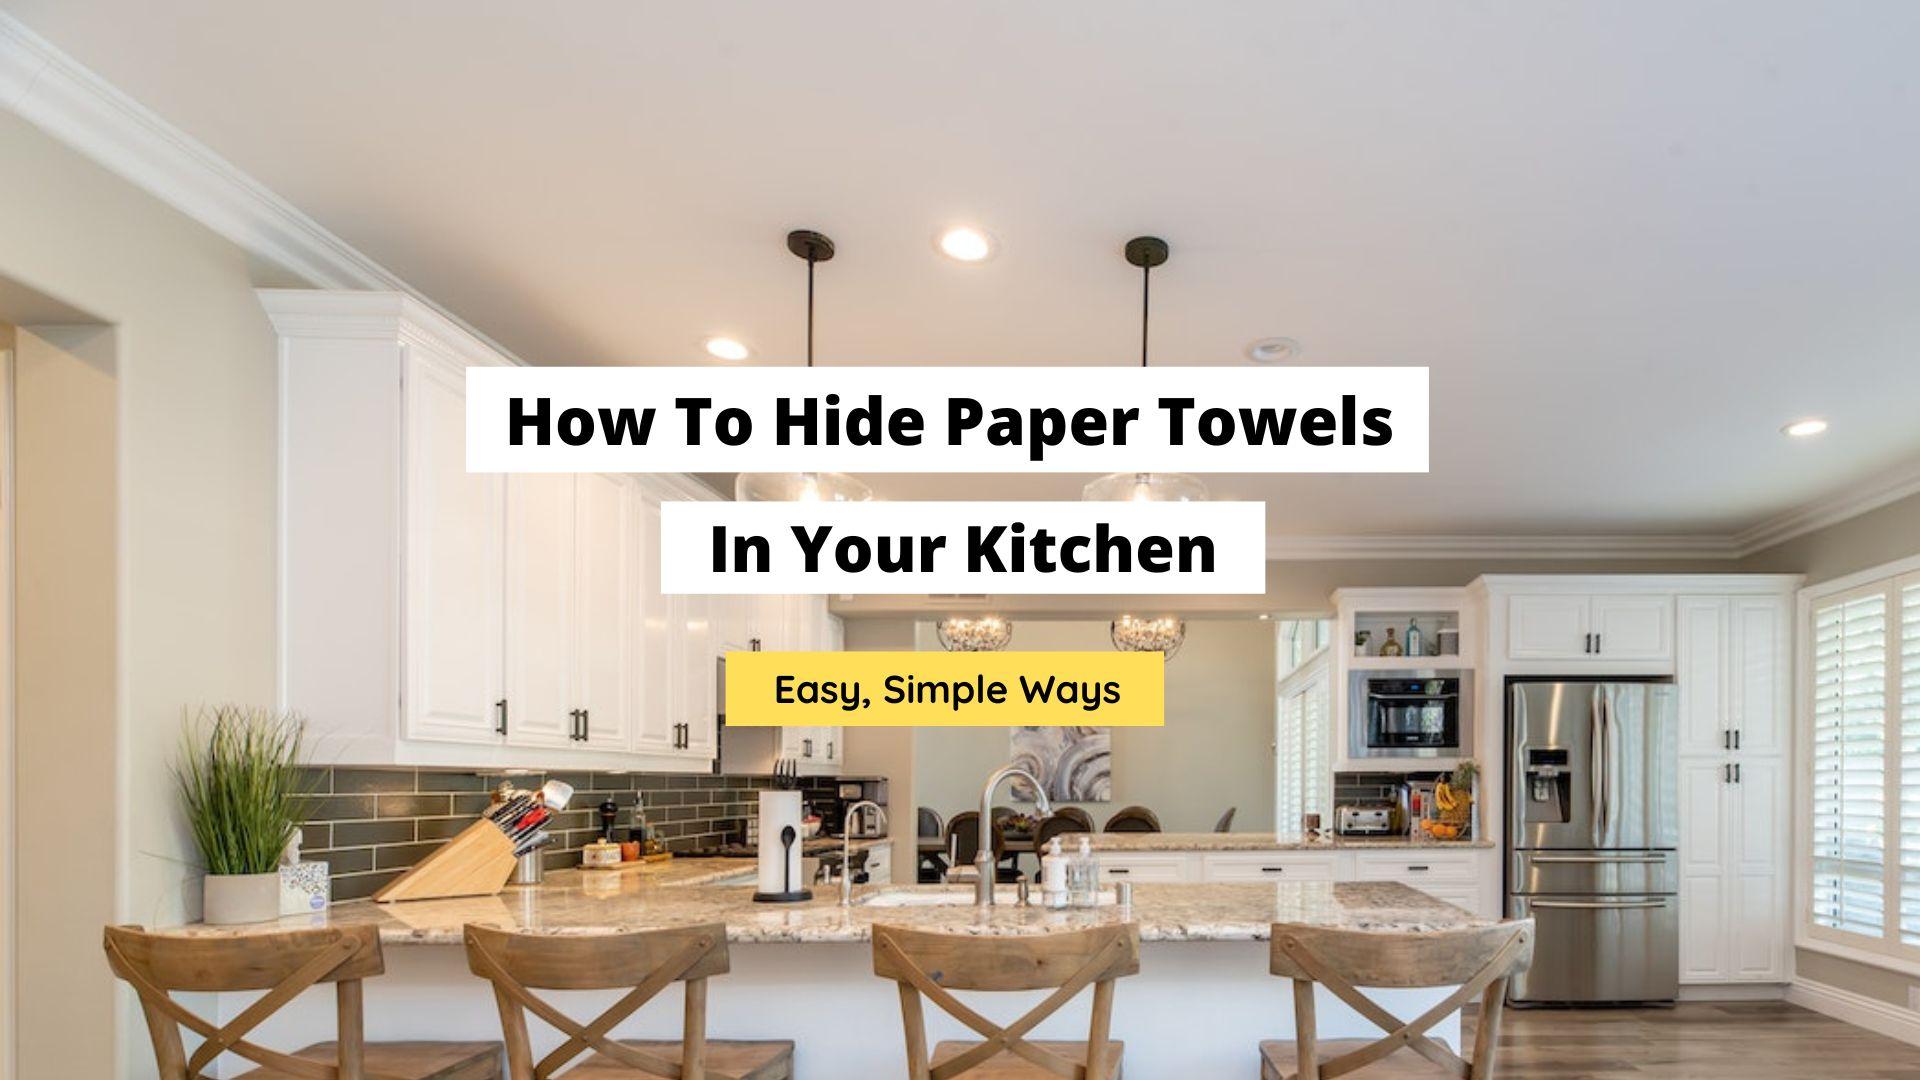 How To Hide Paper Towels In Your Kitchen